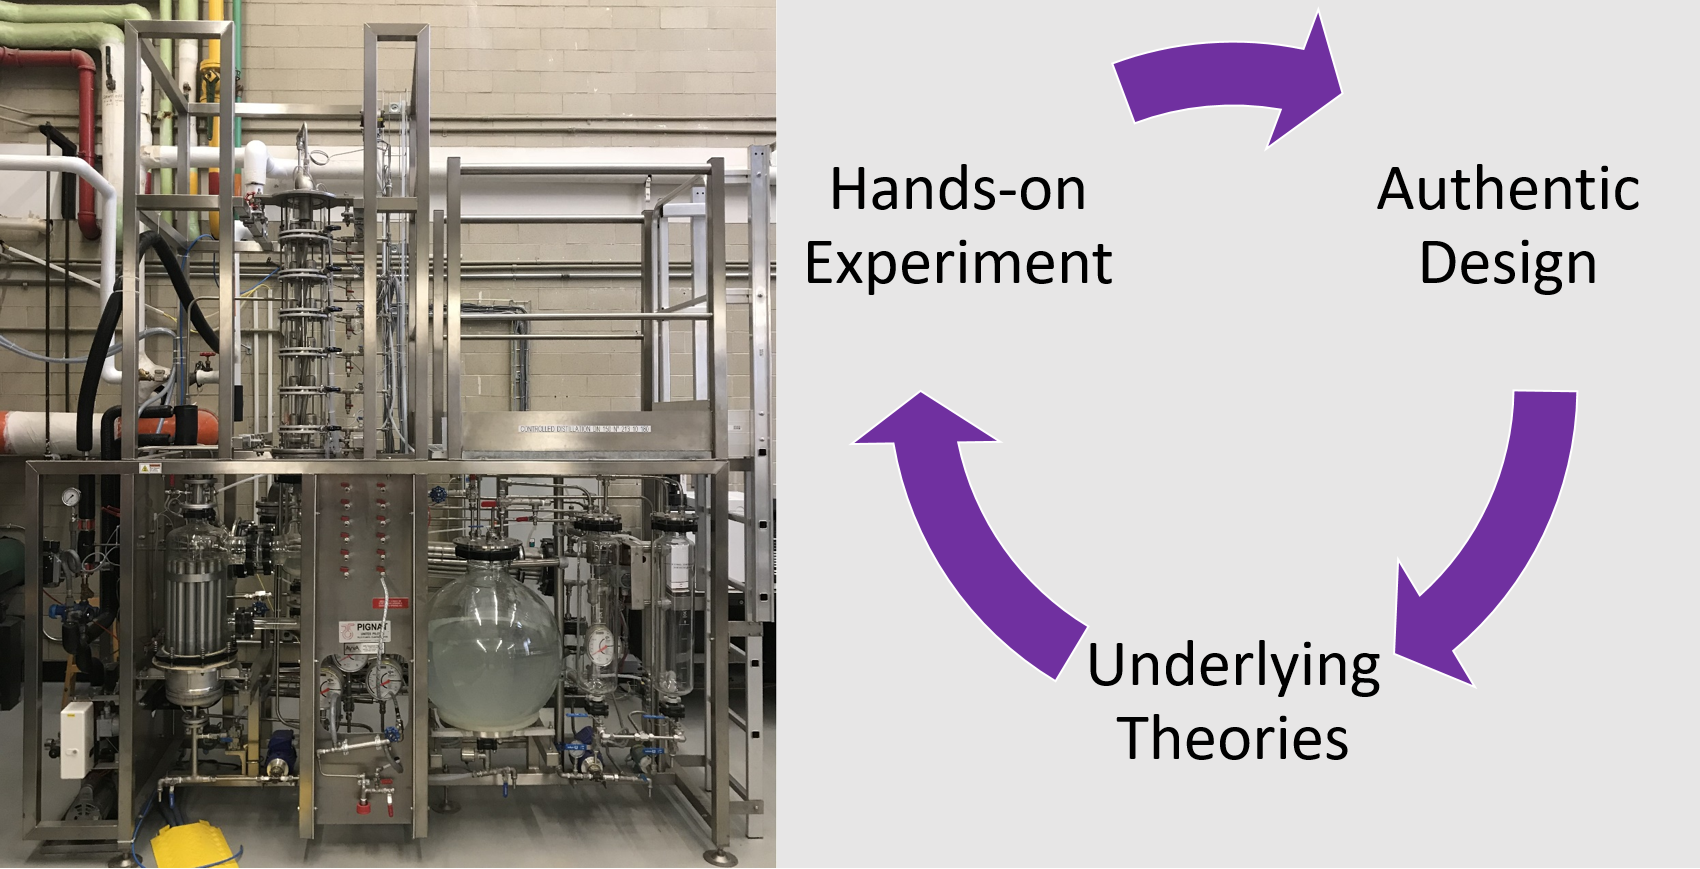 Left side has Engineering lab equipment, right side has figure with the following words in a circle connected by unidirectional arrows: Hands-on Experiment, Authentic Design, Underlying Theories.